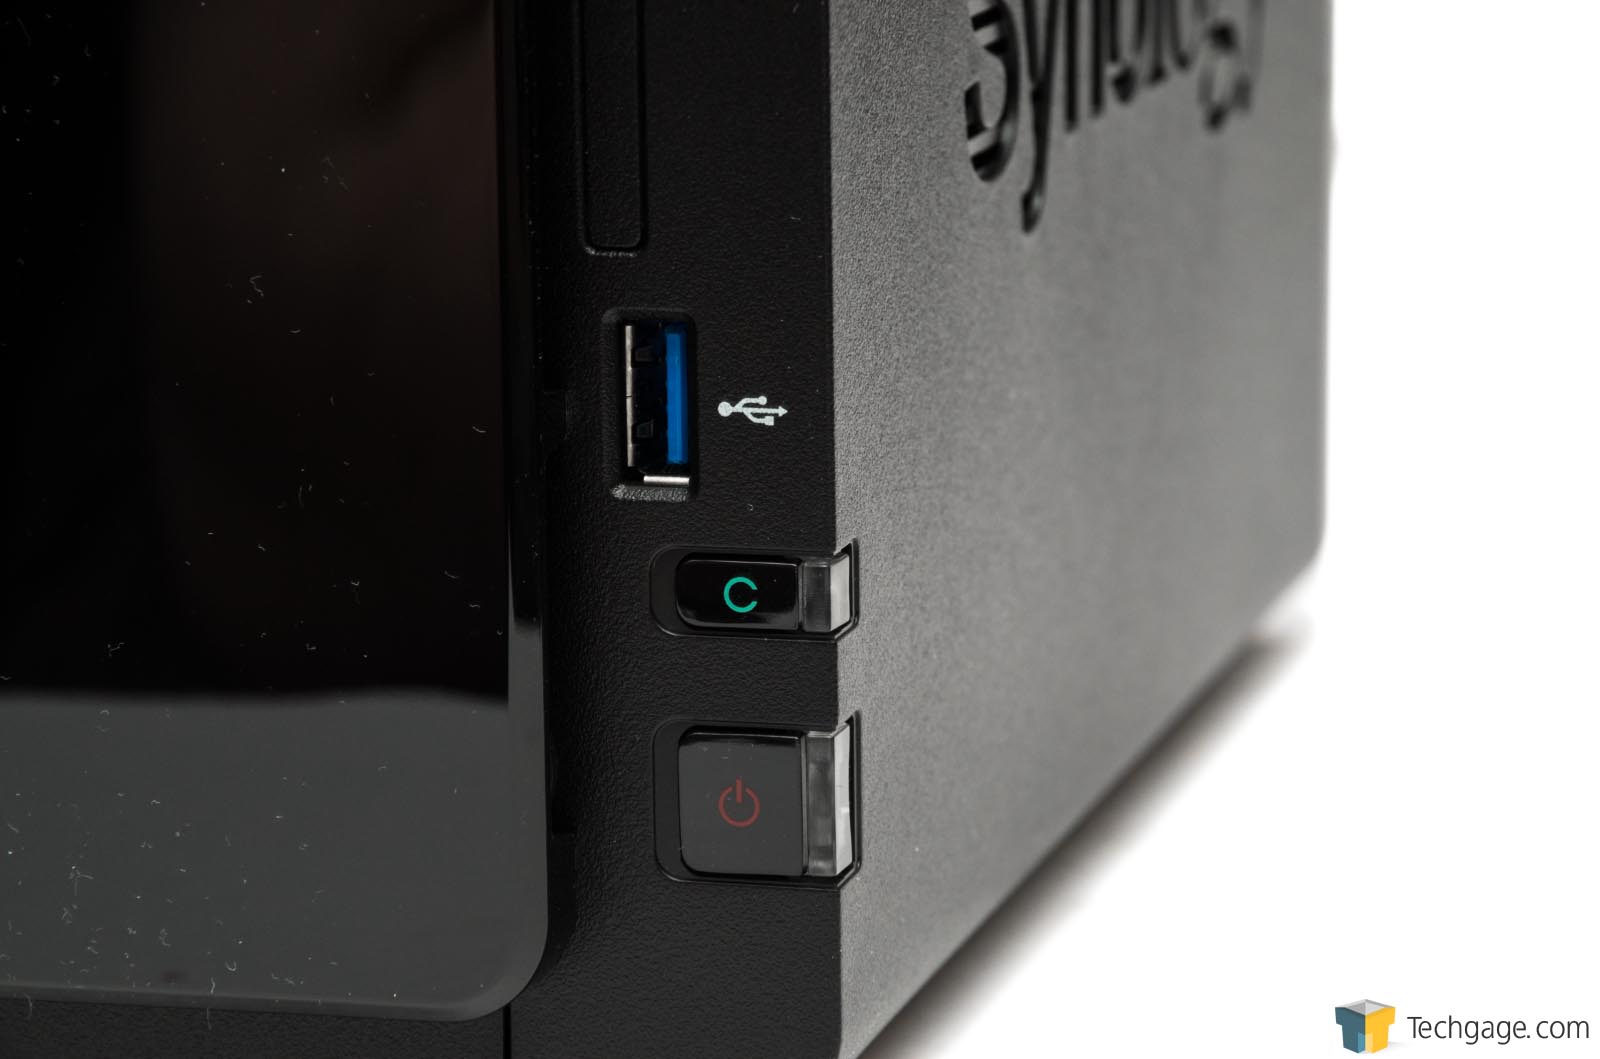 Synology DiskStation DS216+ 2-Bay NAS Review – Techgage